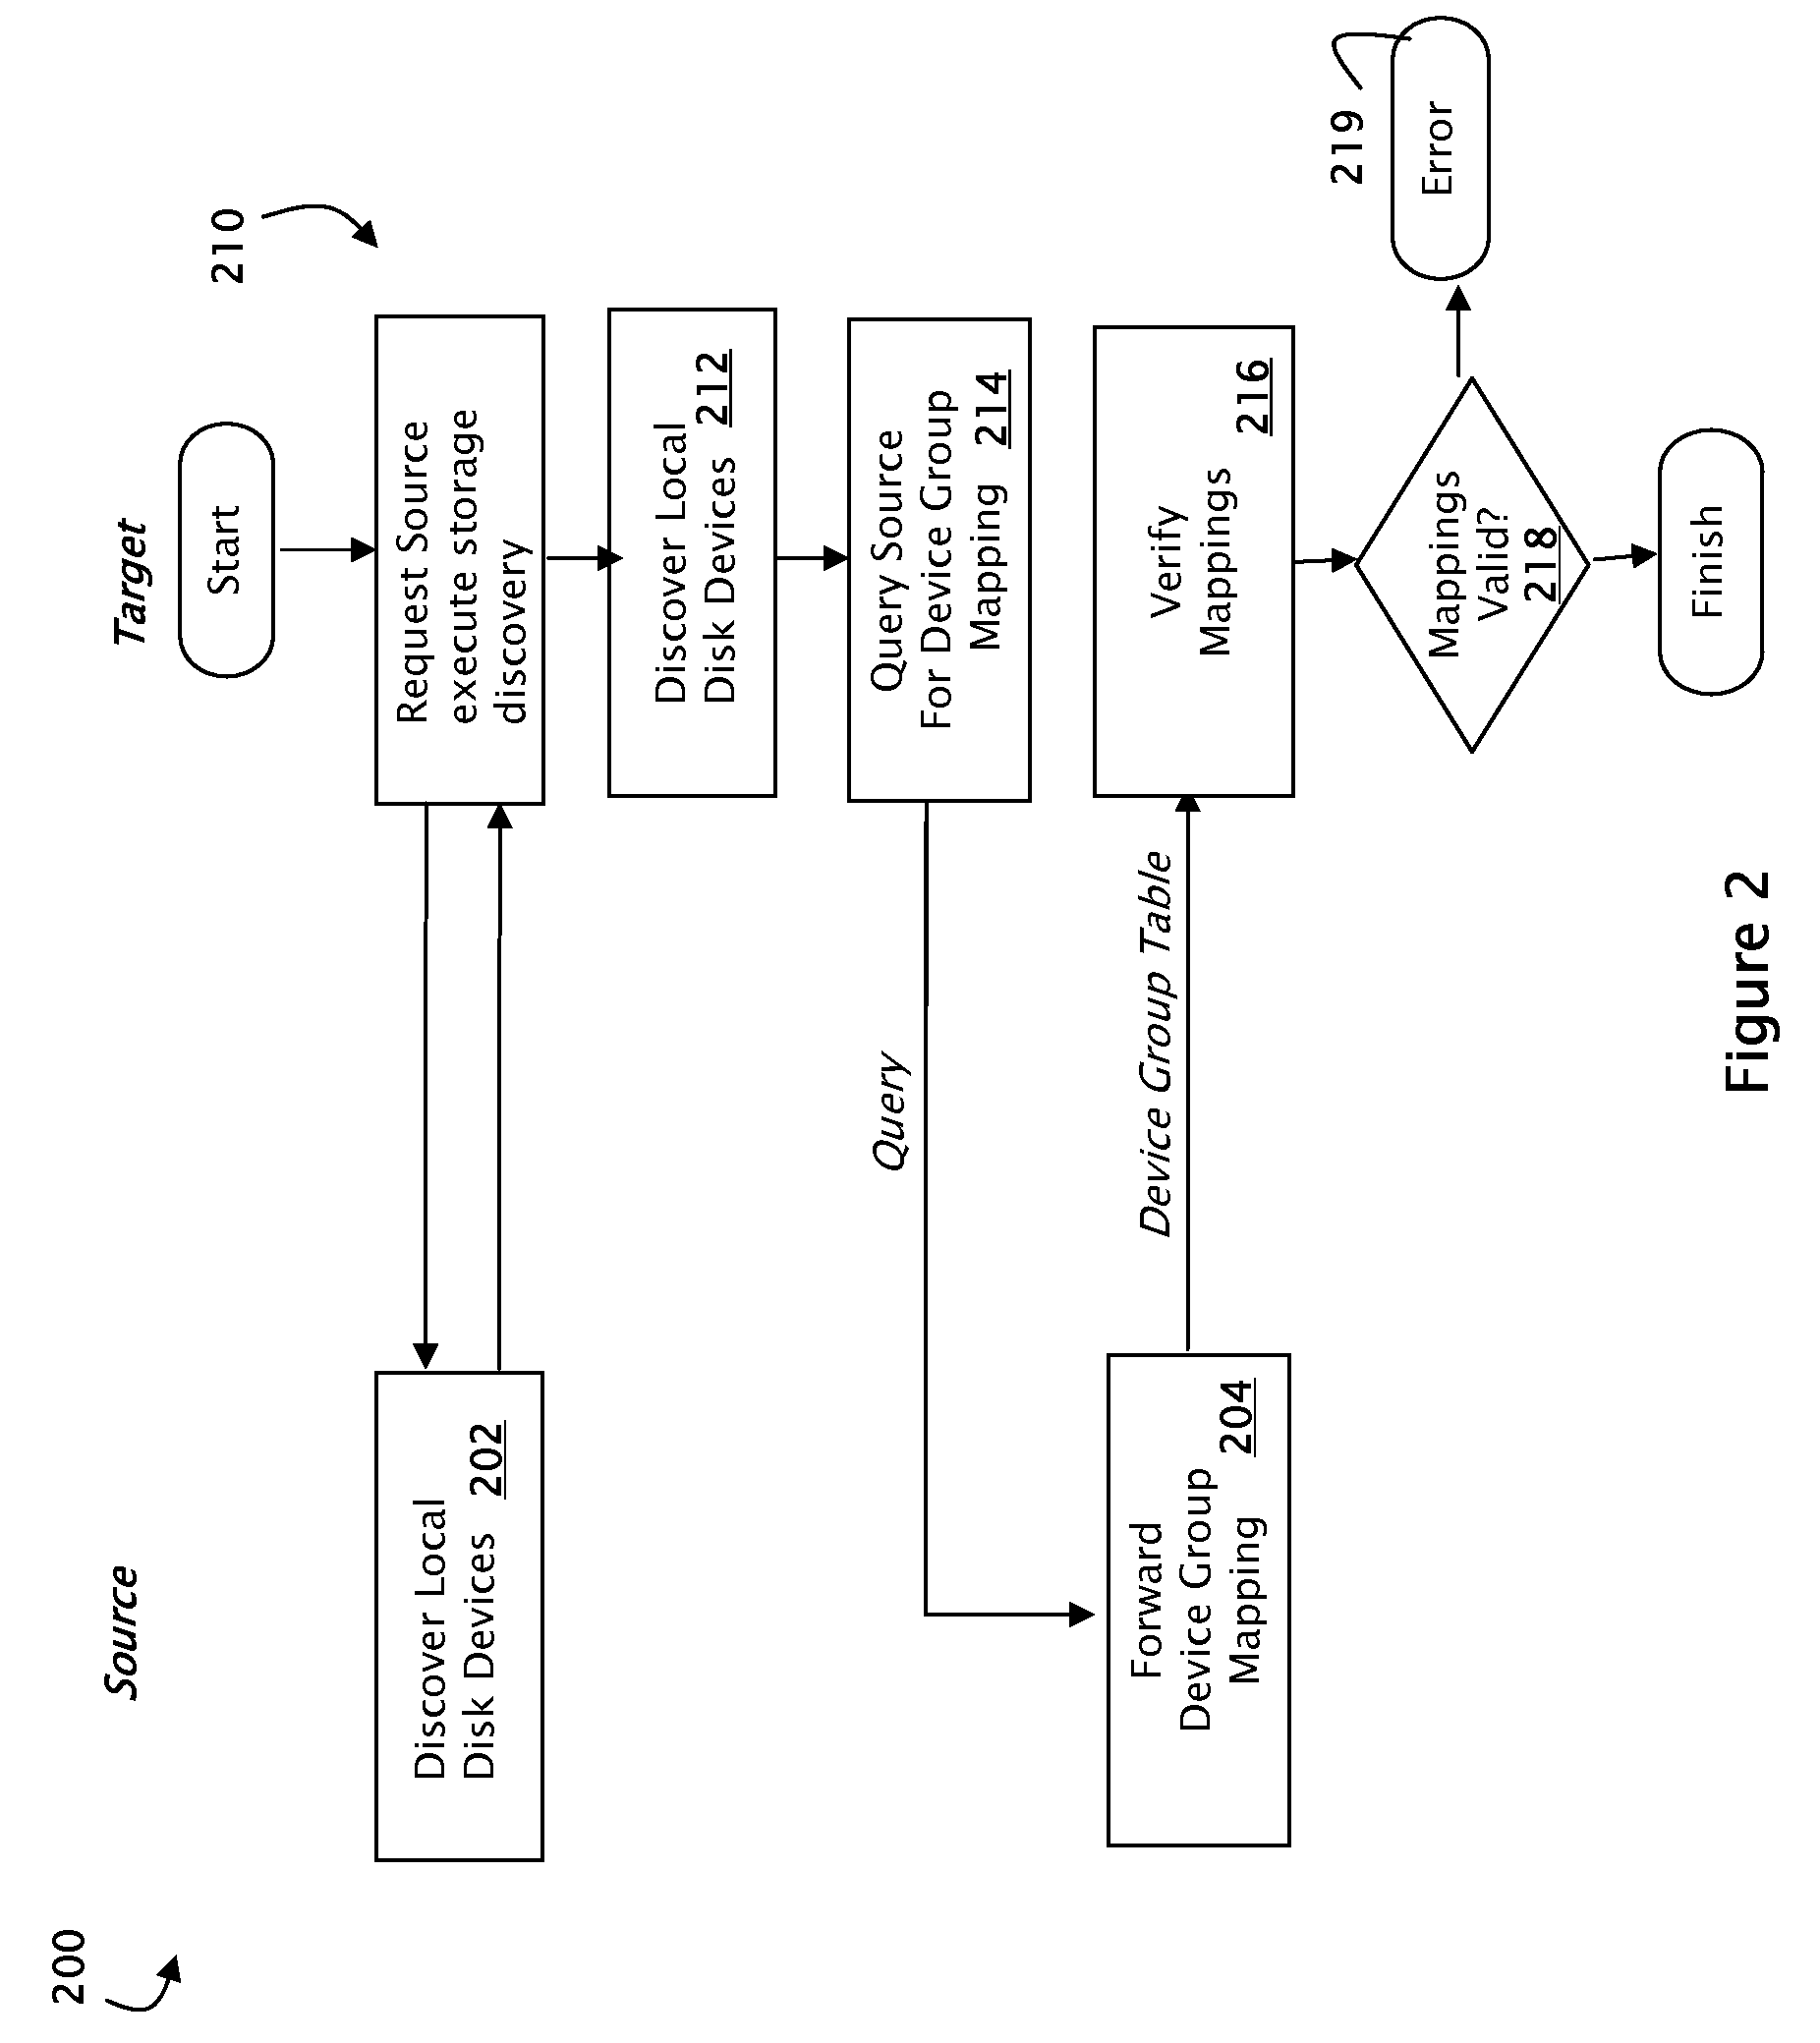 System and method for initializing a network attached storage system for disaster recovery